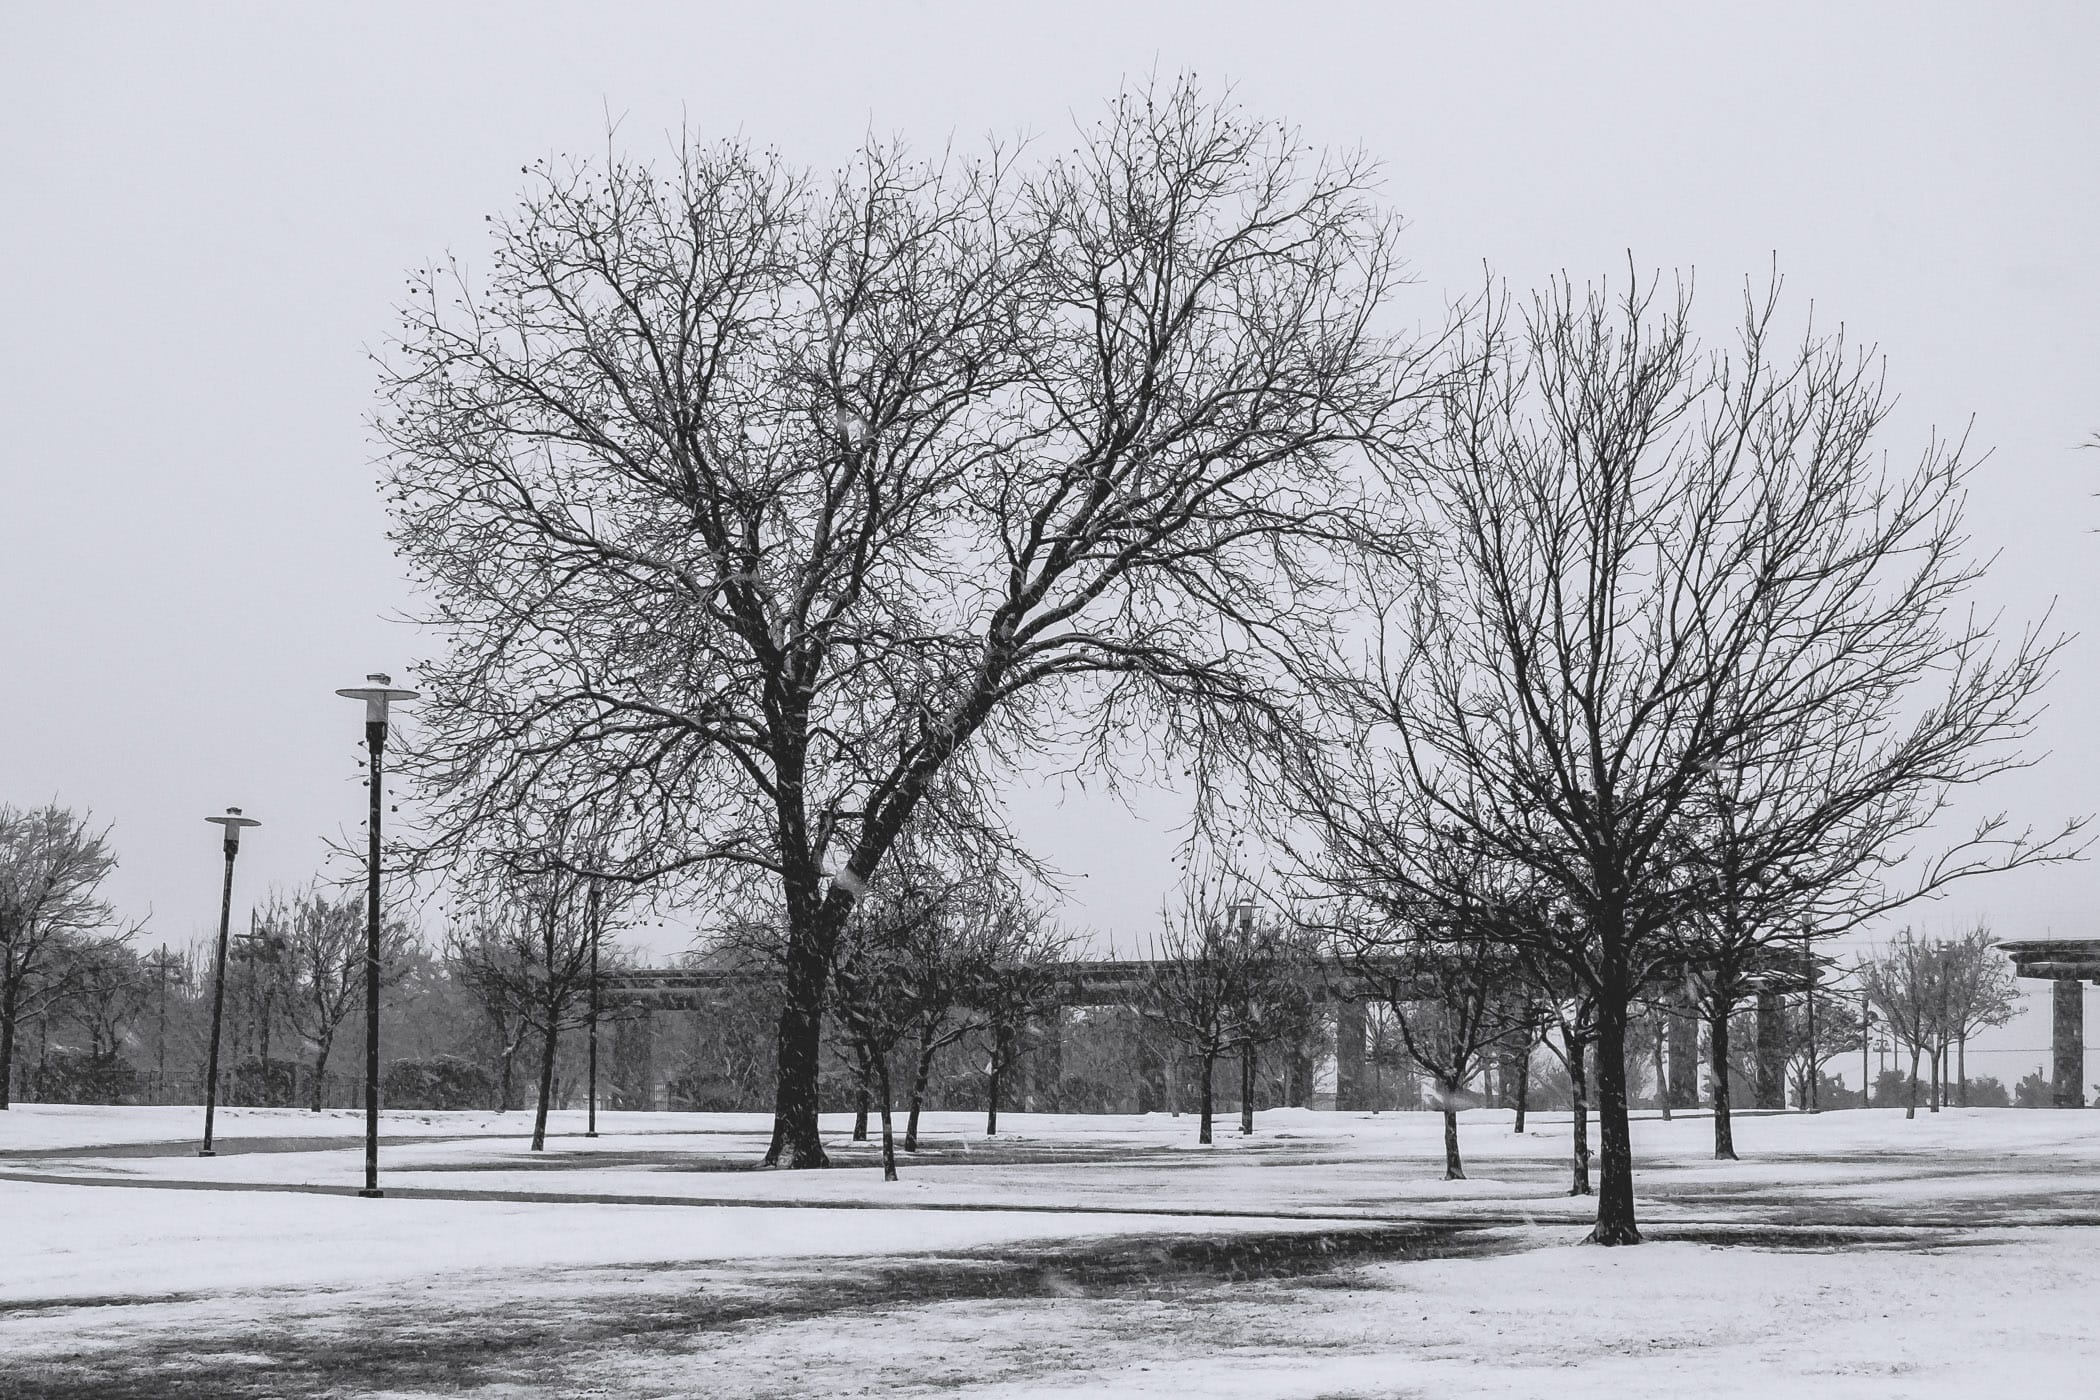 A cold, snowy day at Addison Circle Park, Addison, Texas.